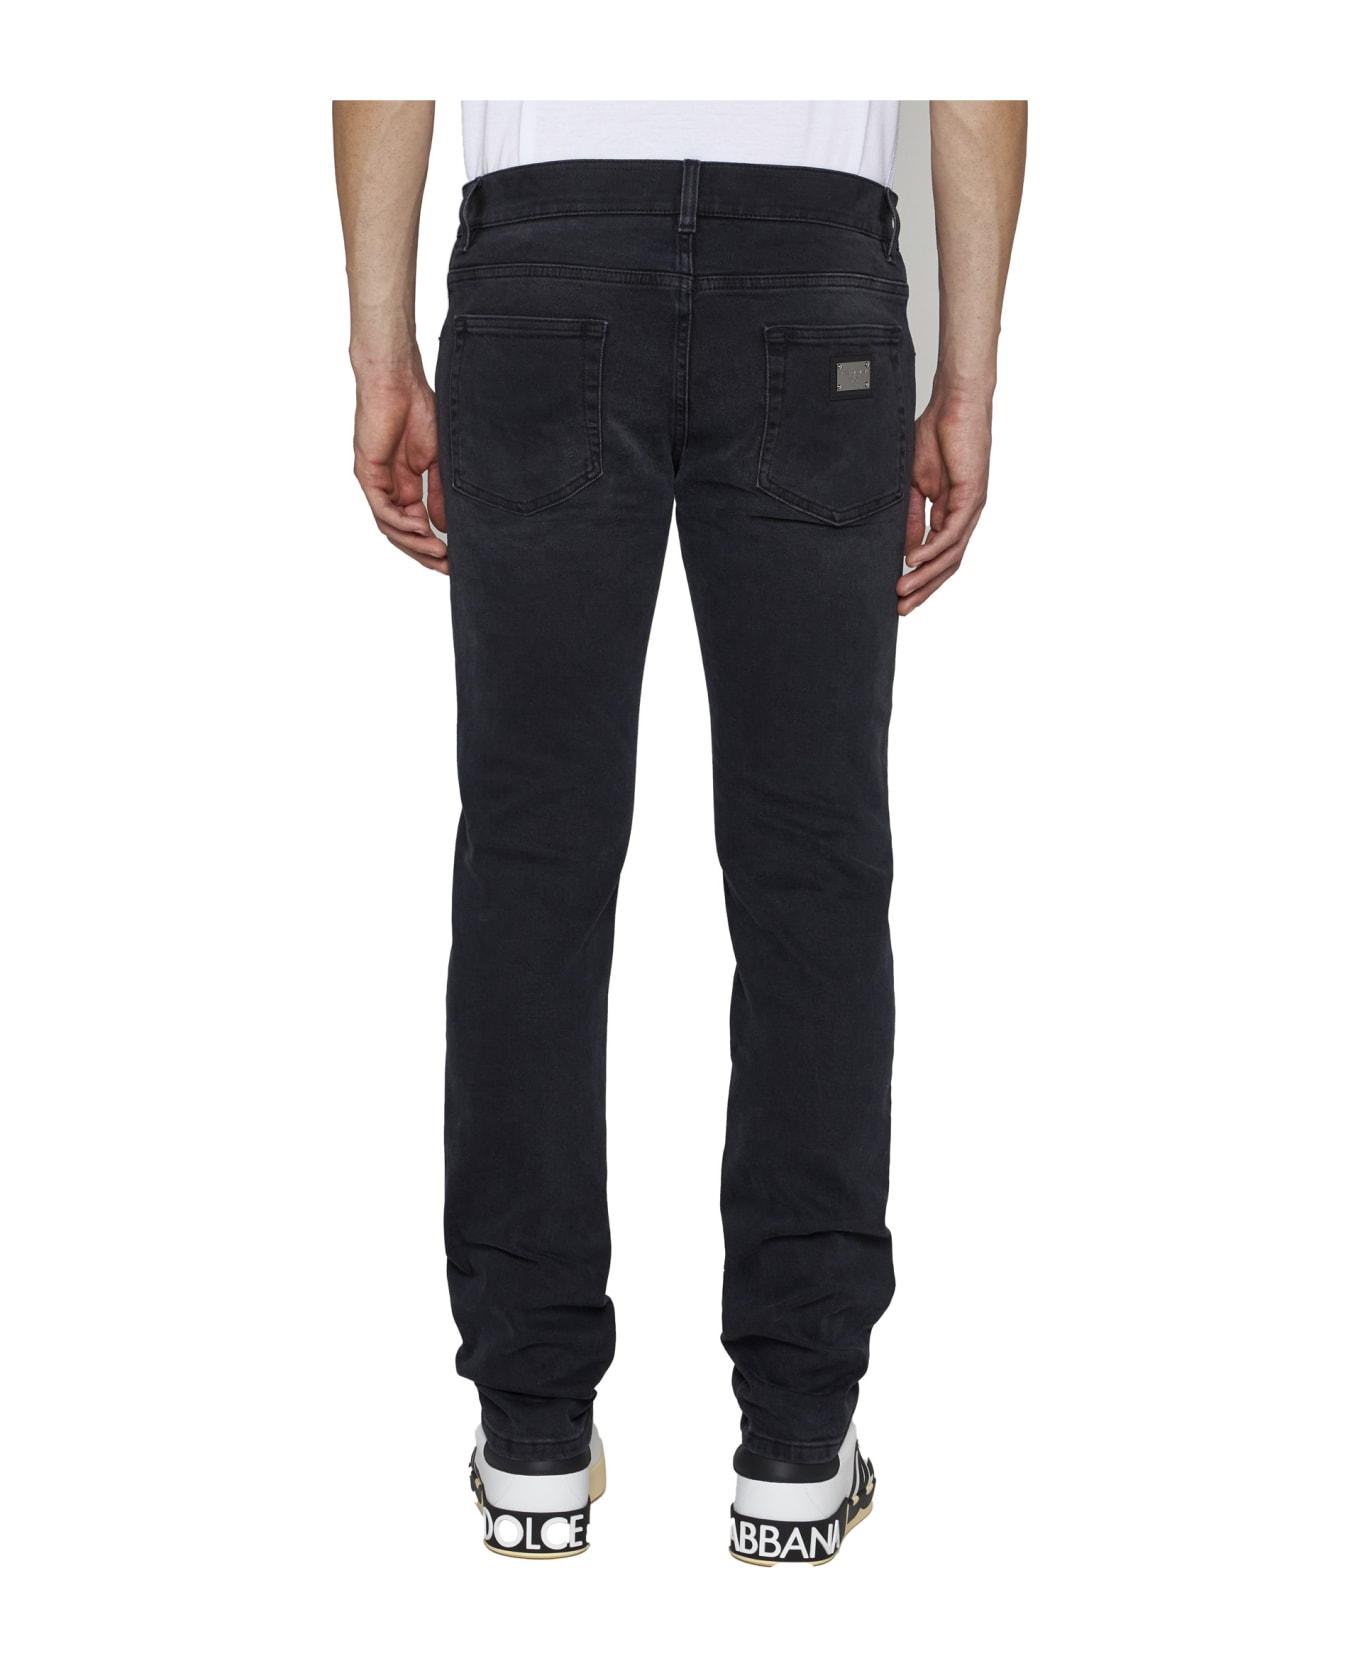 Dolce & Gabbana Buttoned Fitted Jeans - Variante abbinata